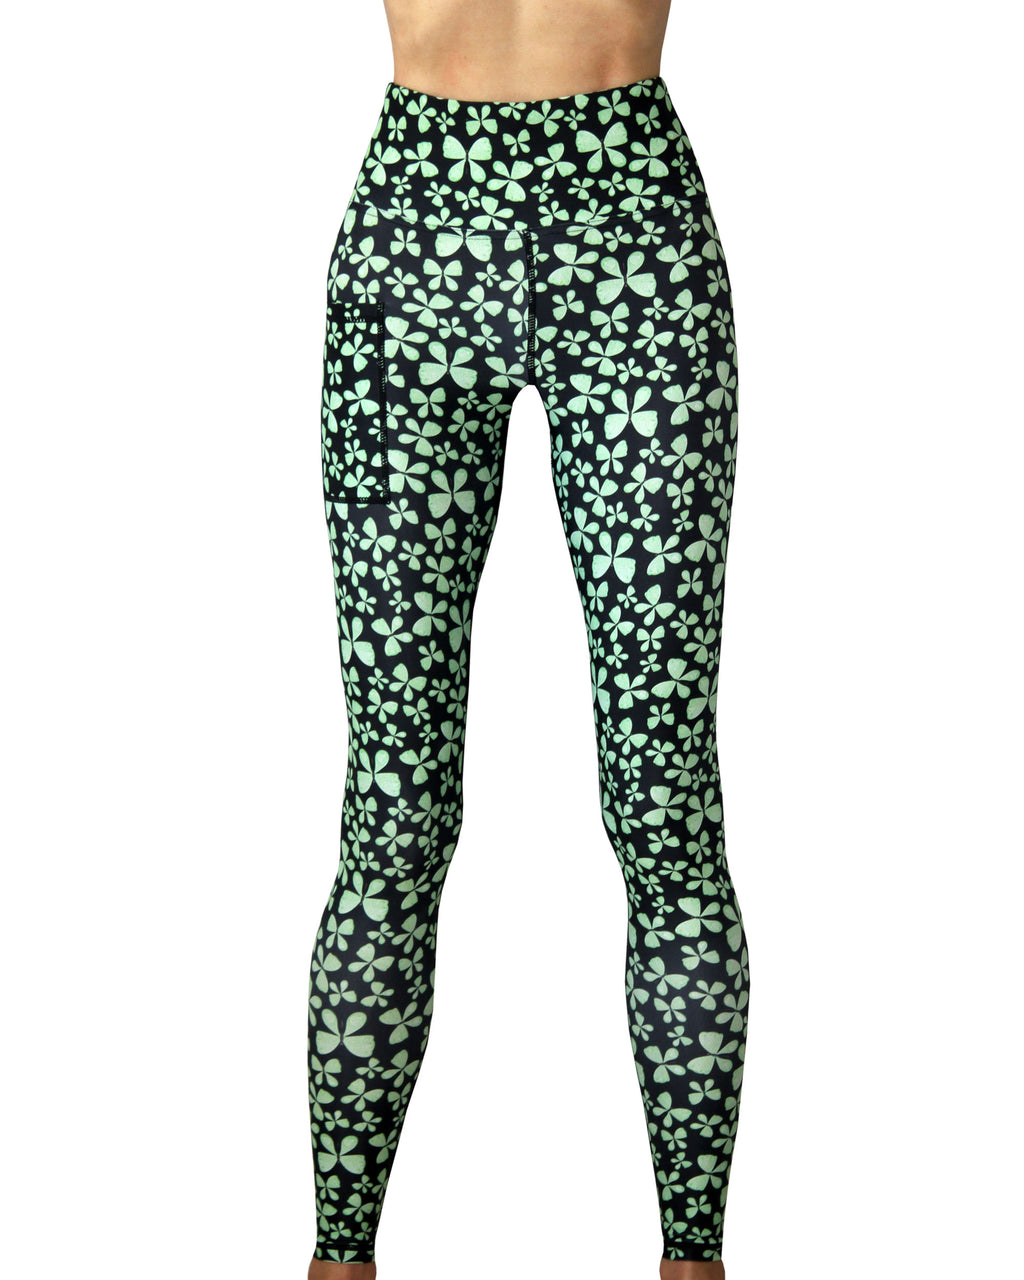 Vivolicious black with green butterflies leggings, made in Cape Town.